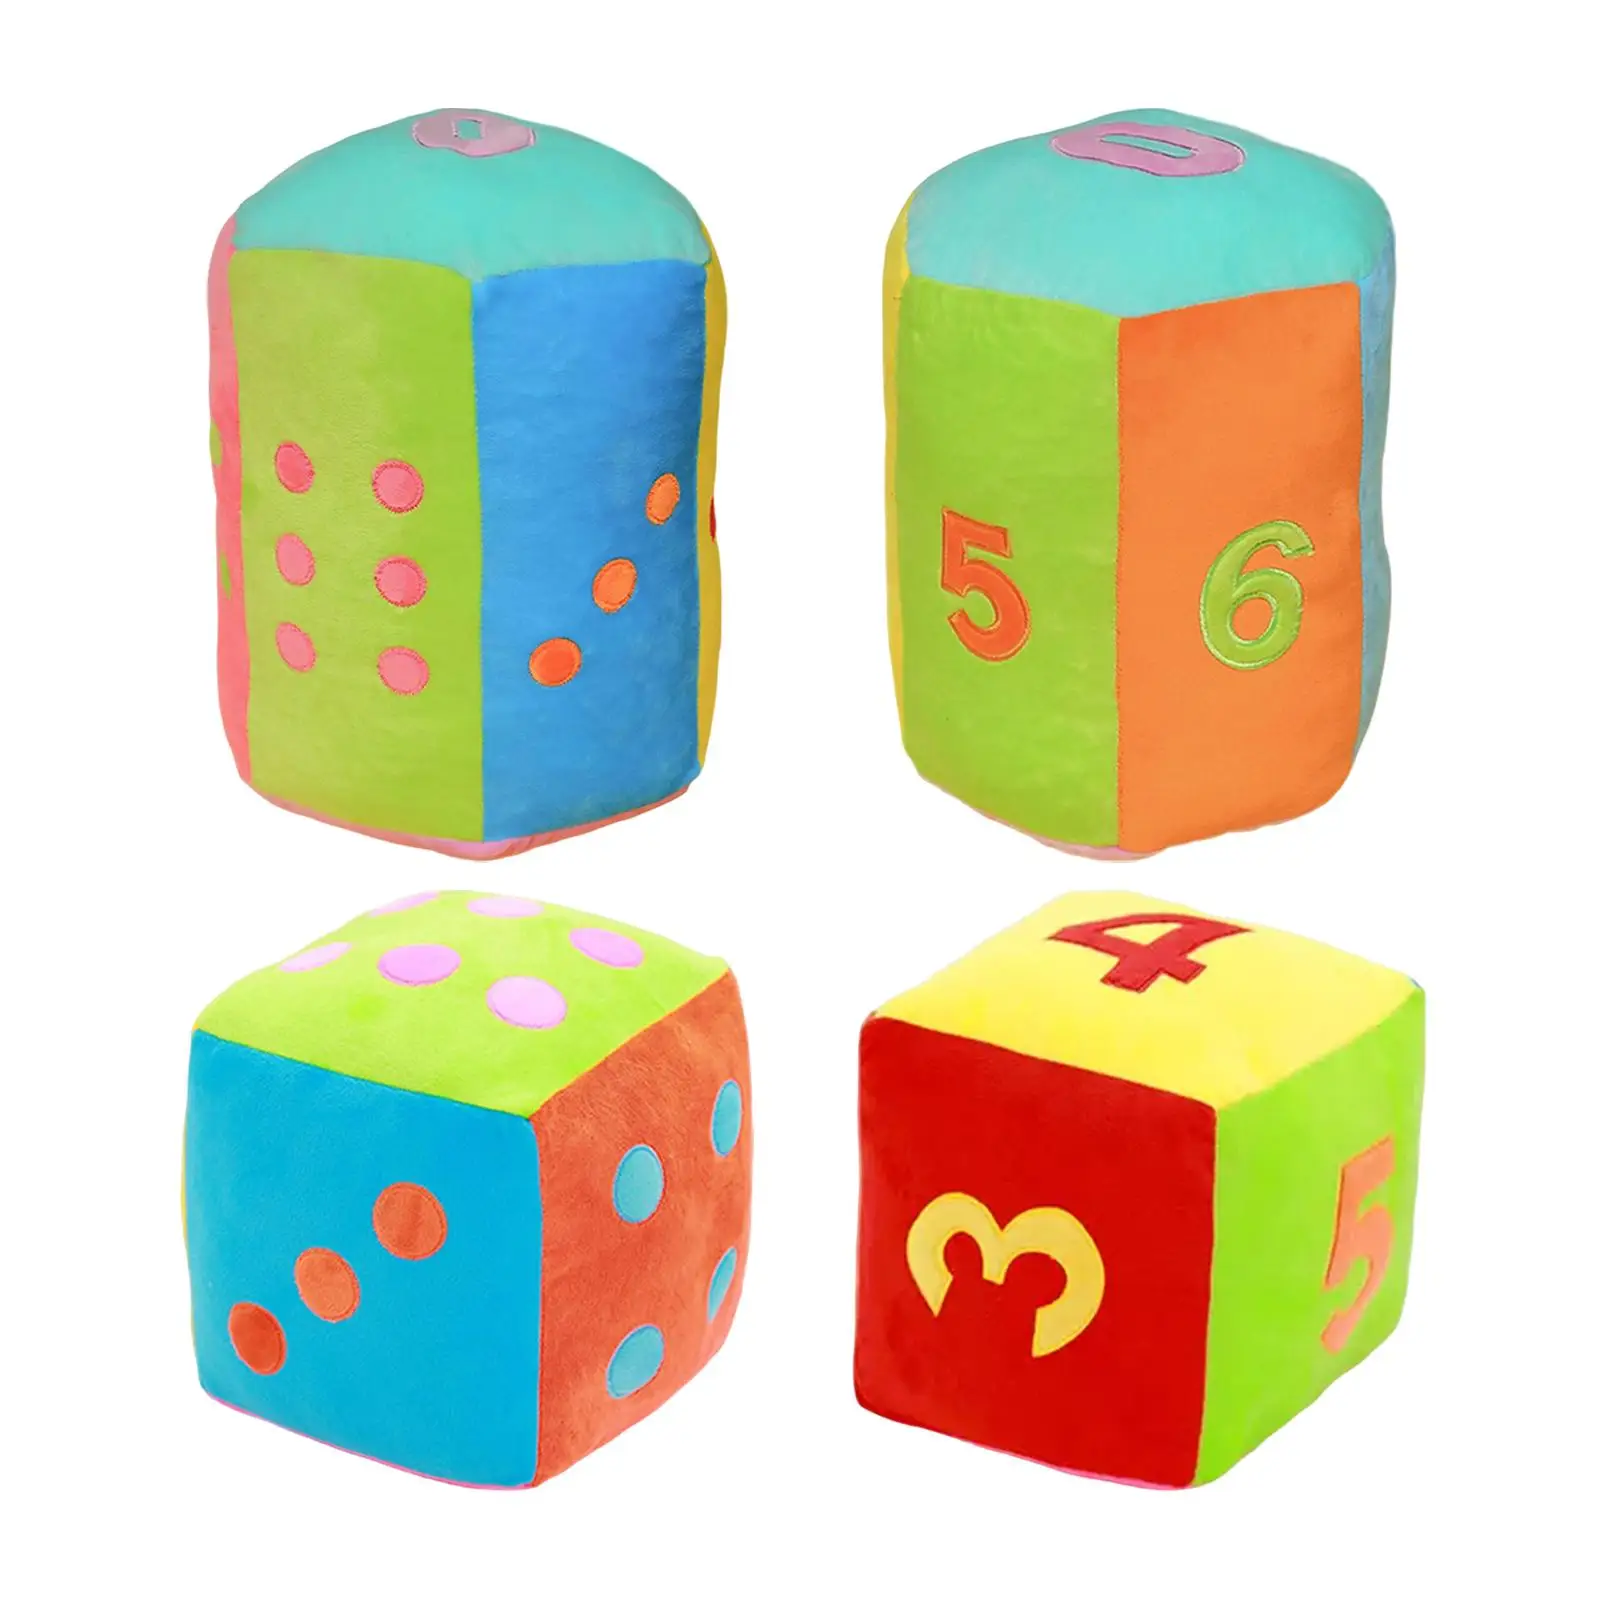 Plush Dice Toy Playing Games Party Favors Educational Party Decorations Ornament Stuffed Toys for Kids Girls Boys Children